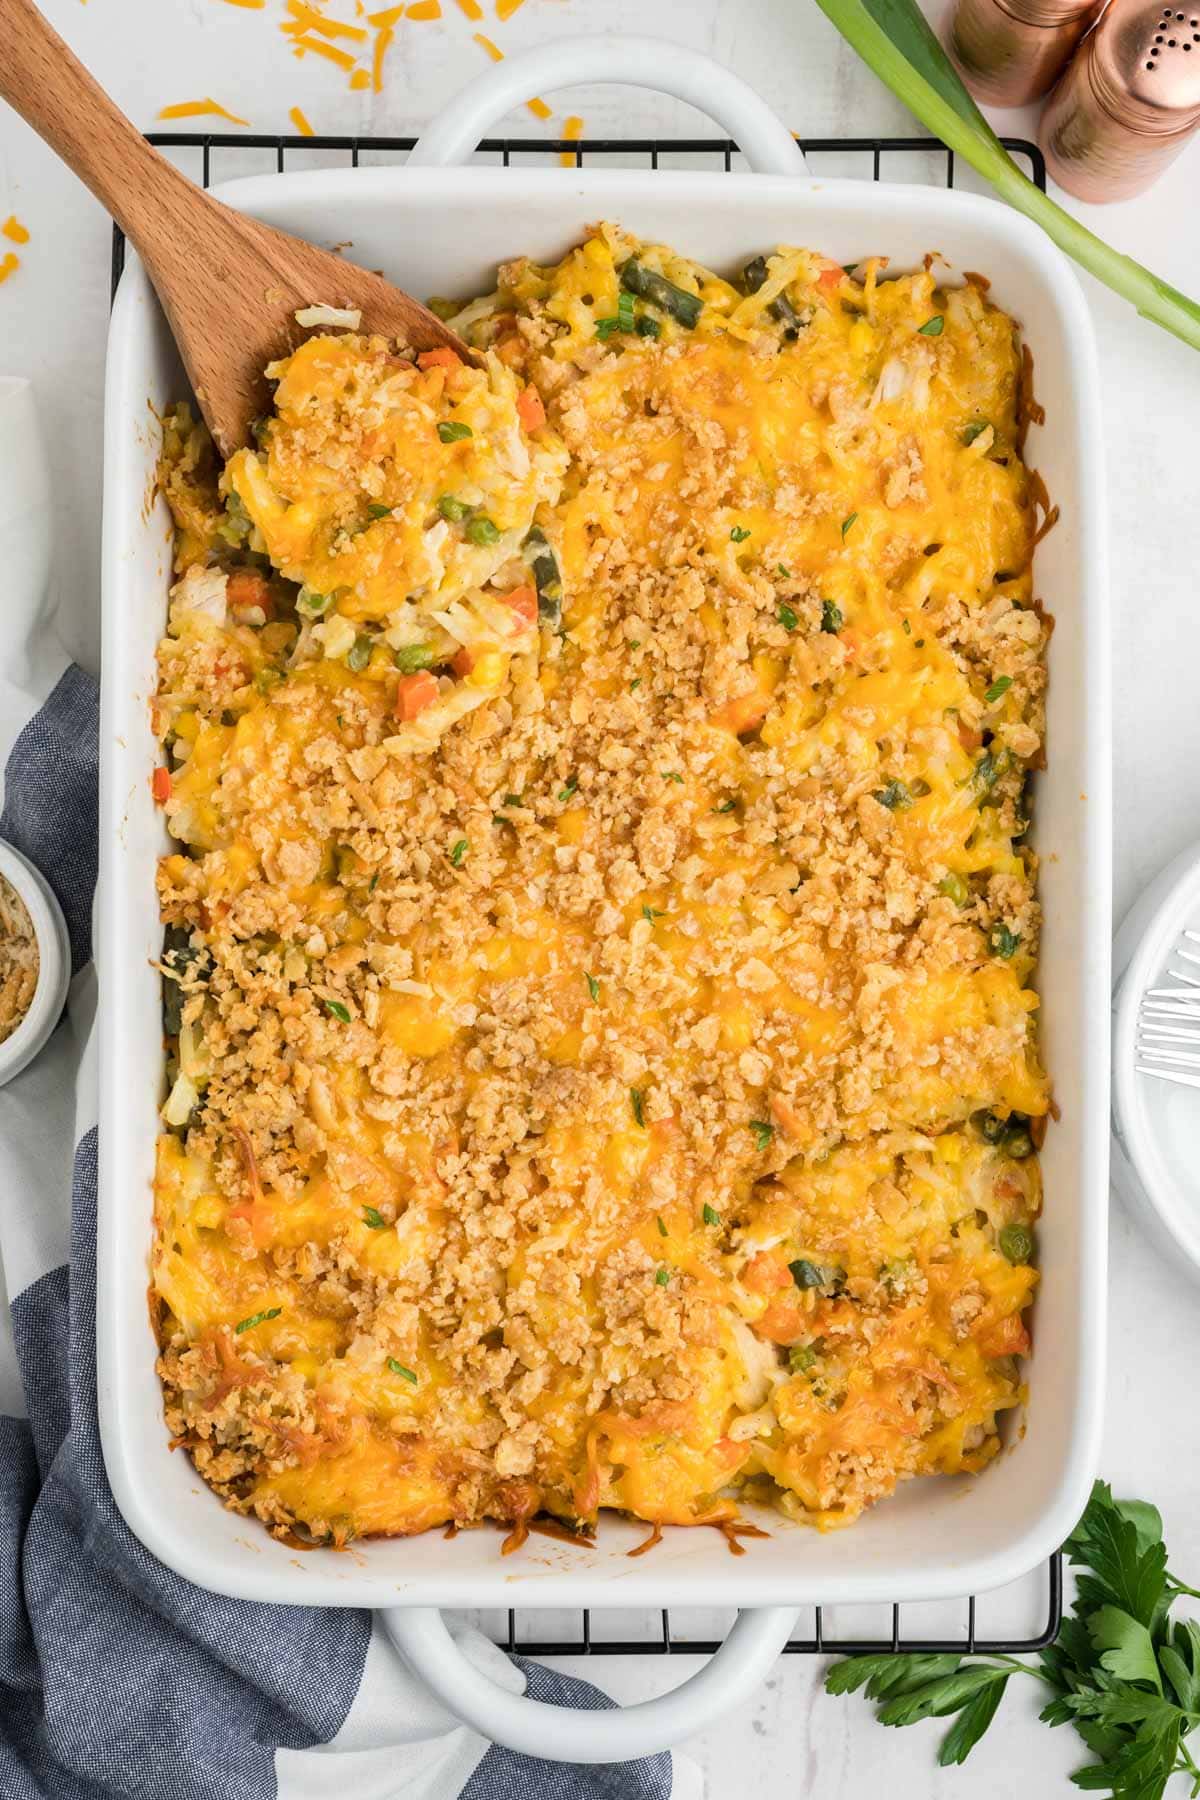 Casserole dish with chicken potato casserole with a cheese and cracker topping; a wooden spoon sits in the dish.